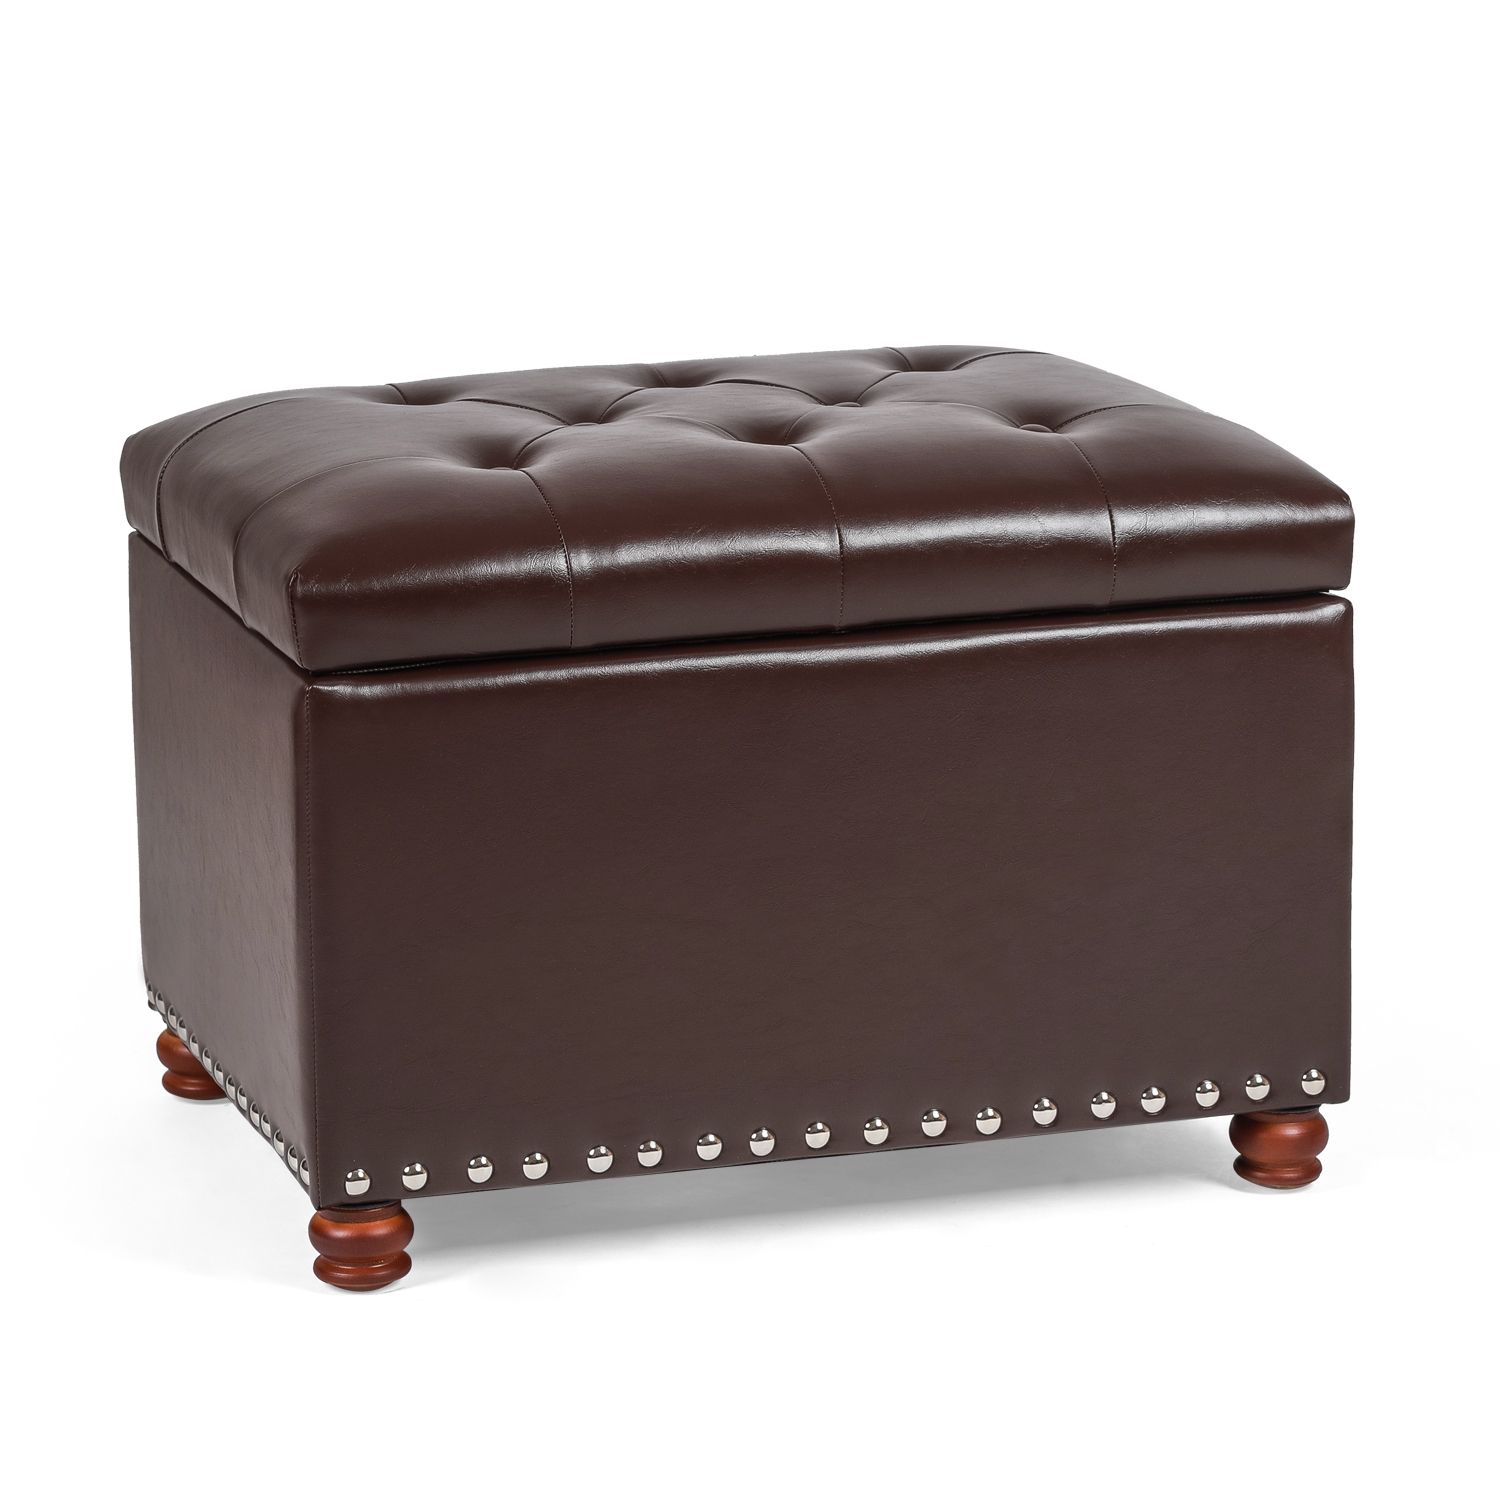 Homebeez Rectangular Leather Ottoman Bench Foot Rest Brown – Walmart Pertaining To Small White Hide Leather Ottomans (View 5 of 20)